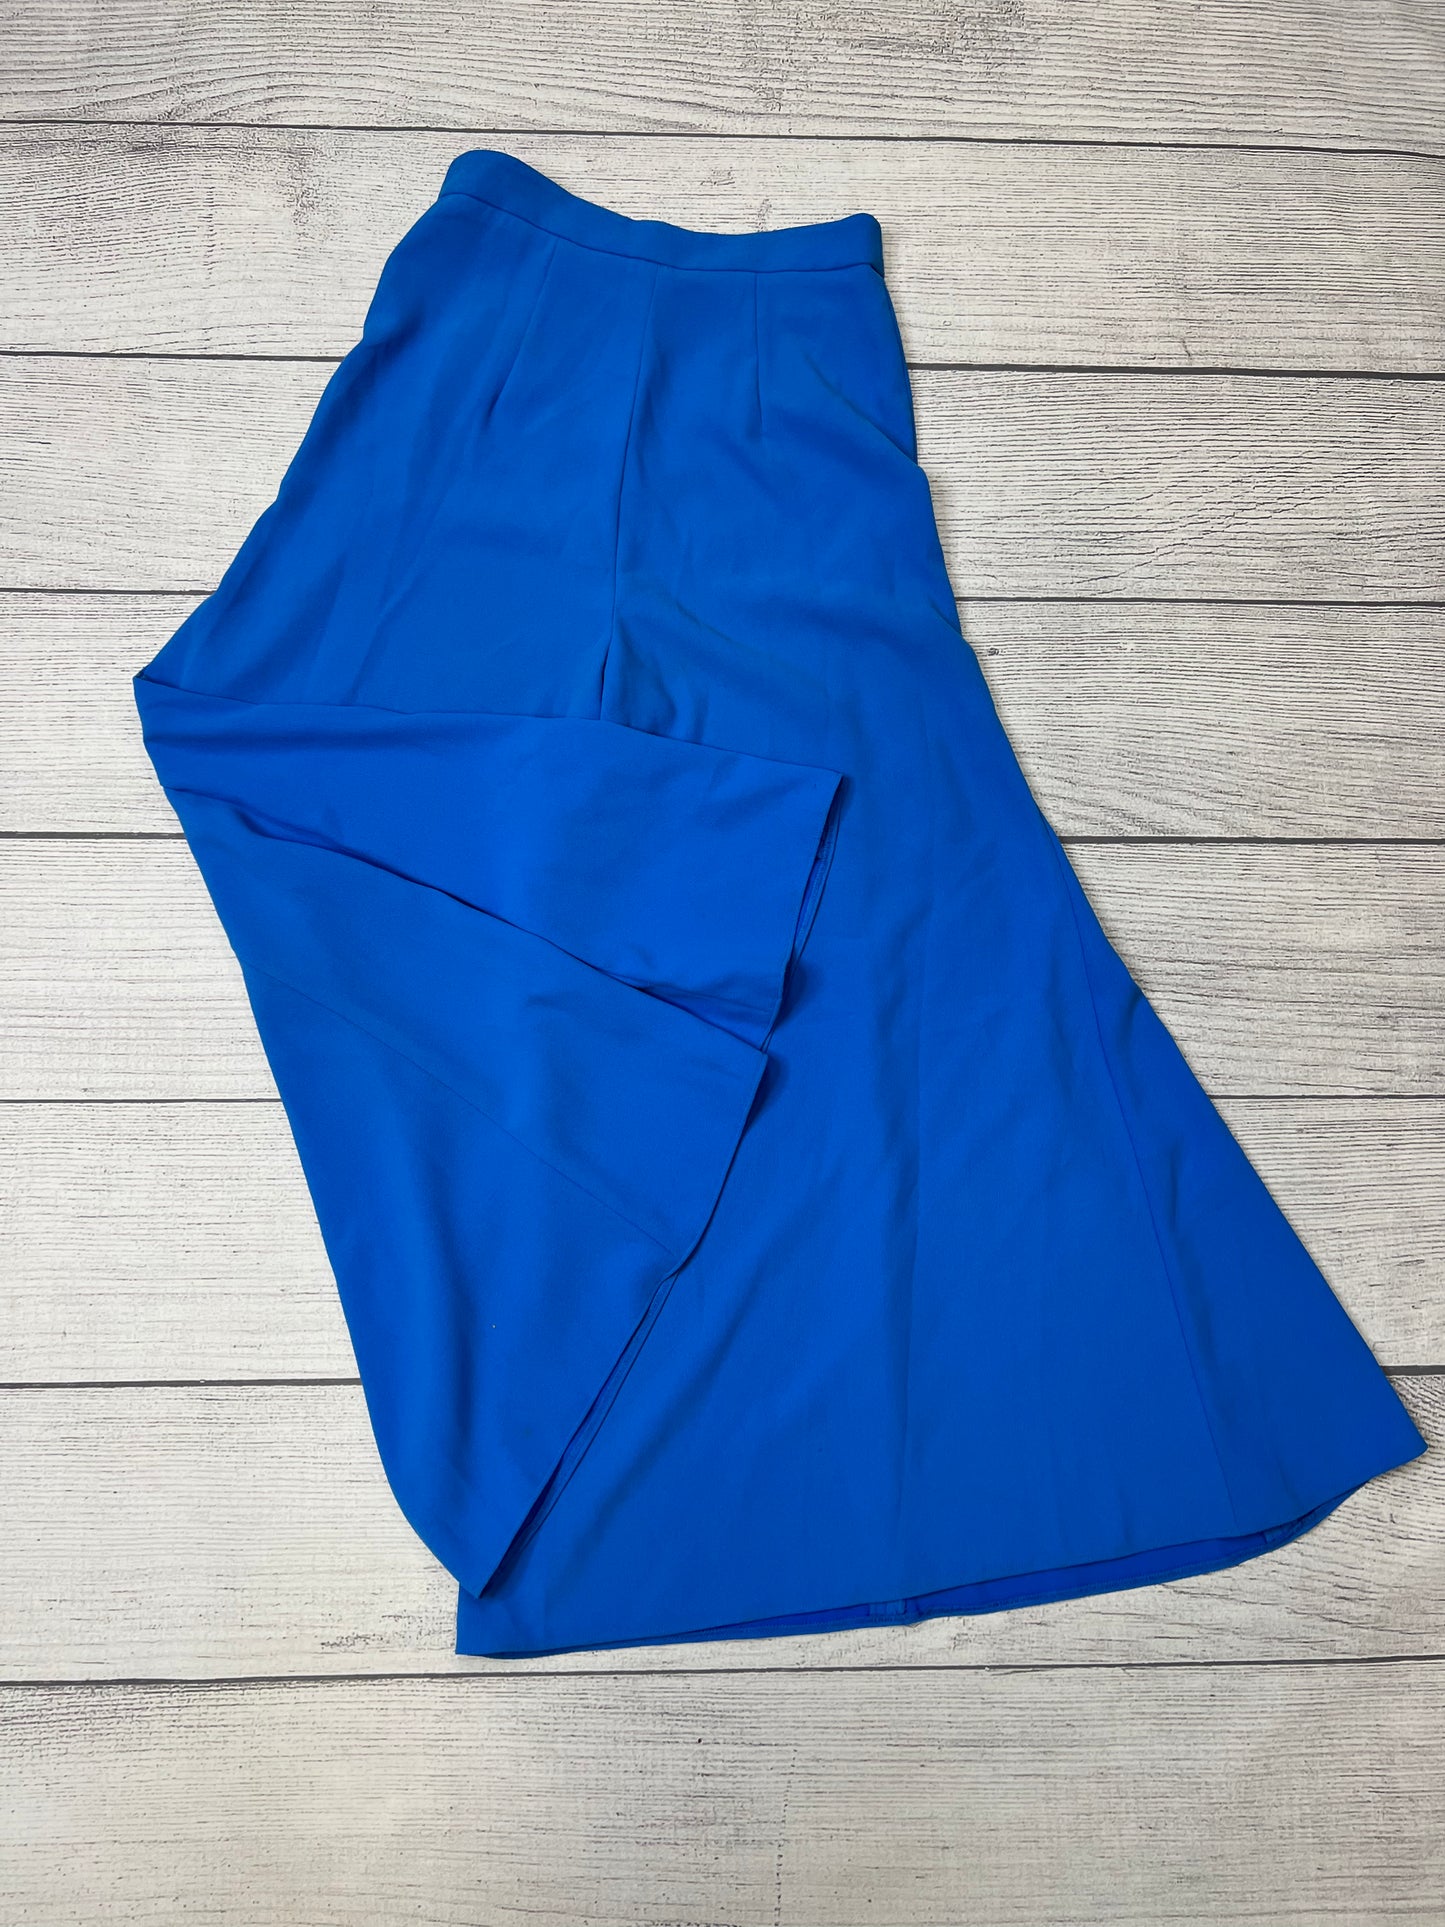 Pants Ankle By Gianni Bini  Size: 0